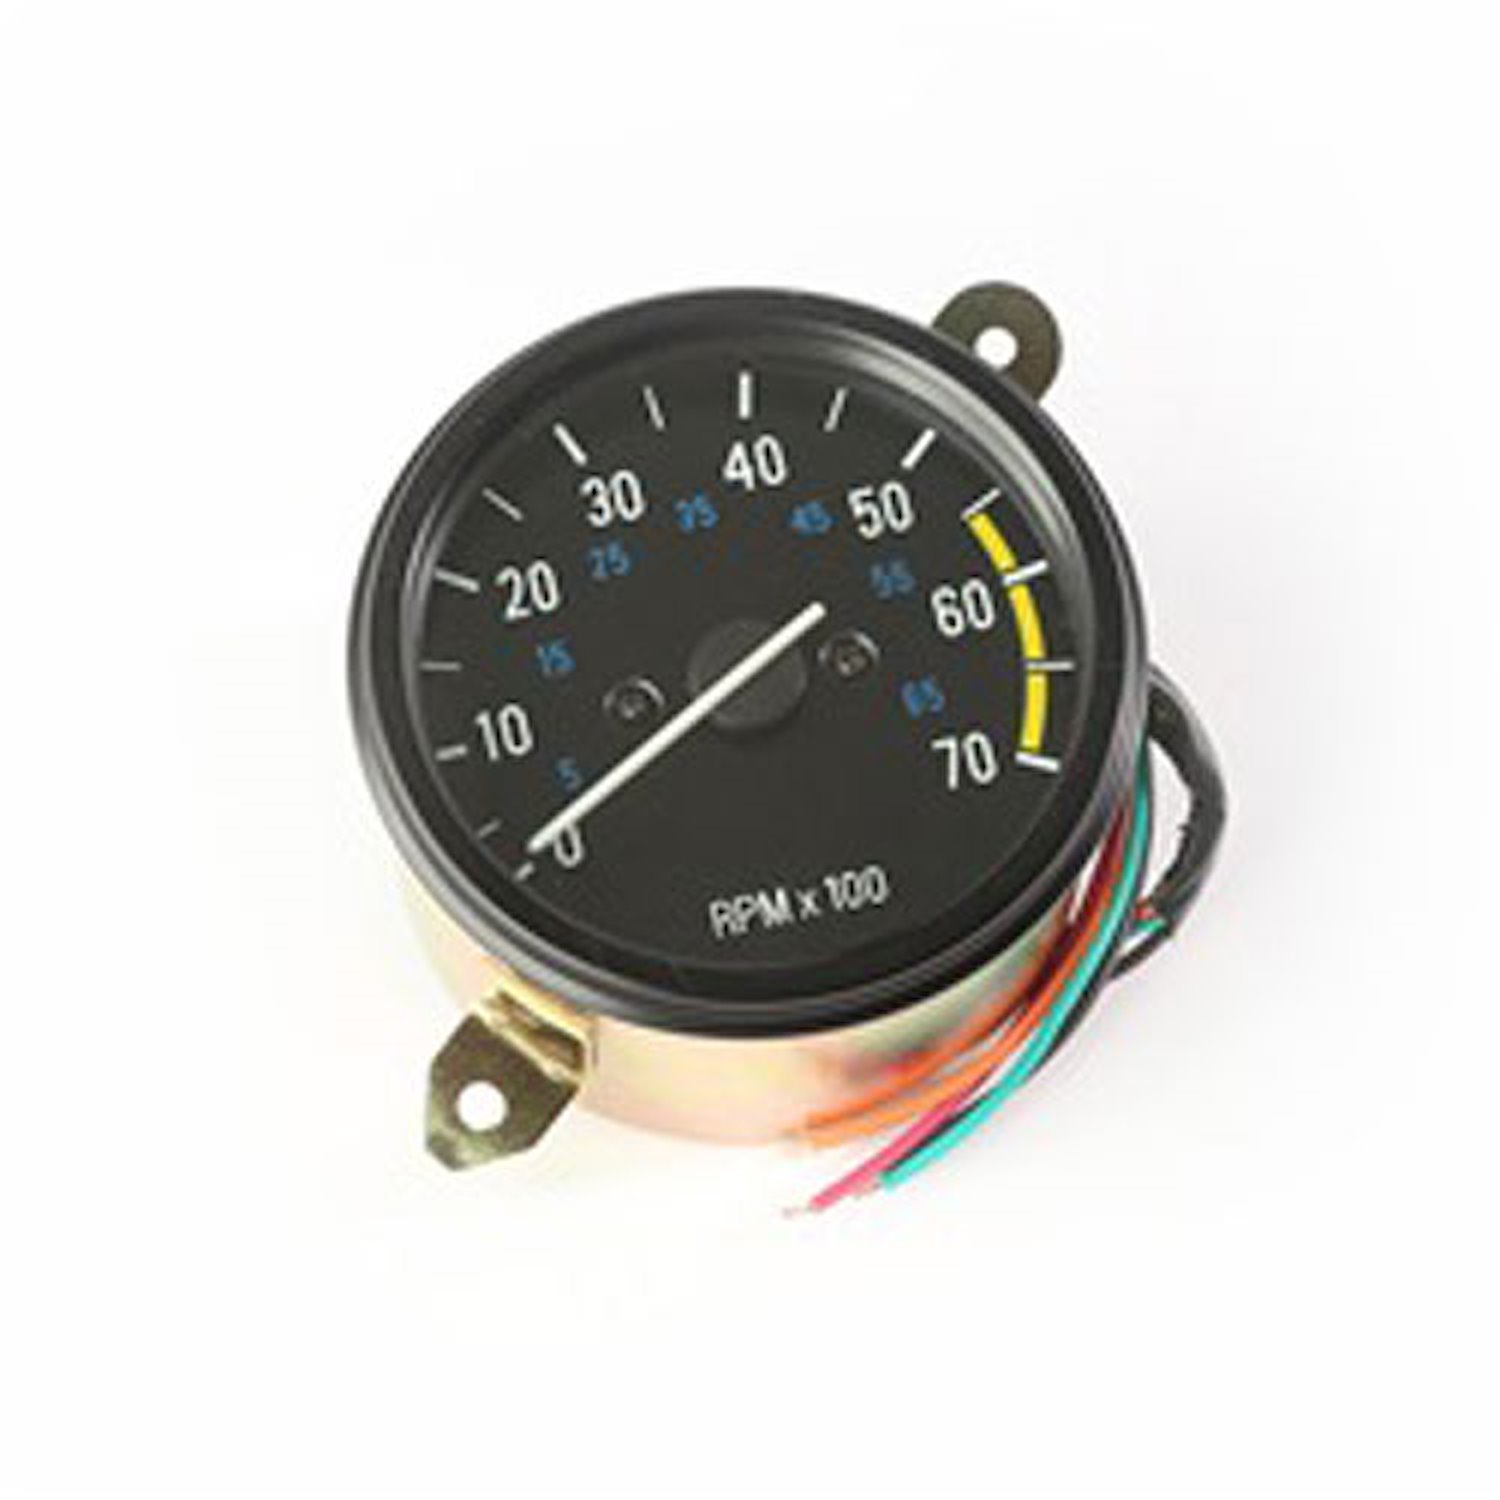 Replacement tachometer from Omix-ADA, Fits 87-91 Jeep Wranglers with a 2.5L engine.